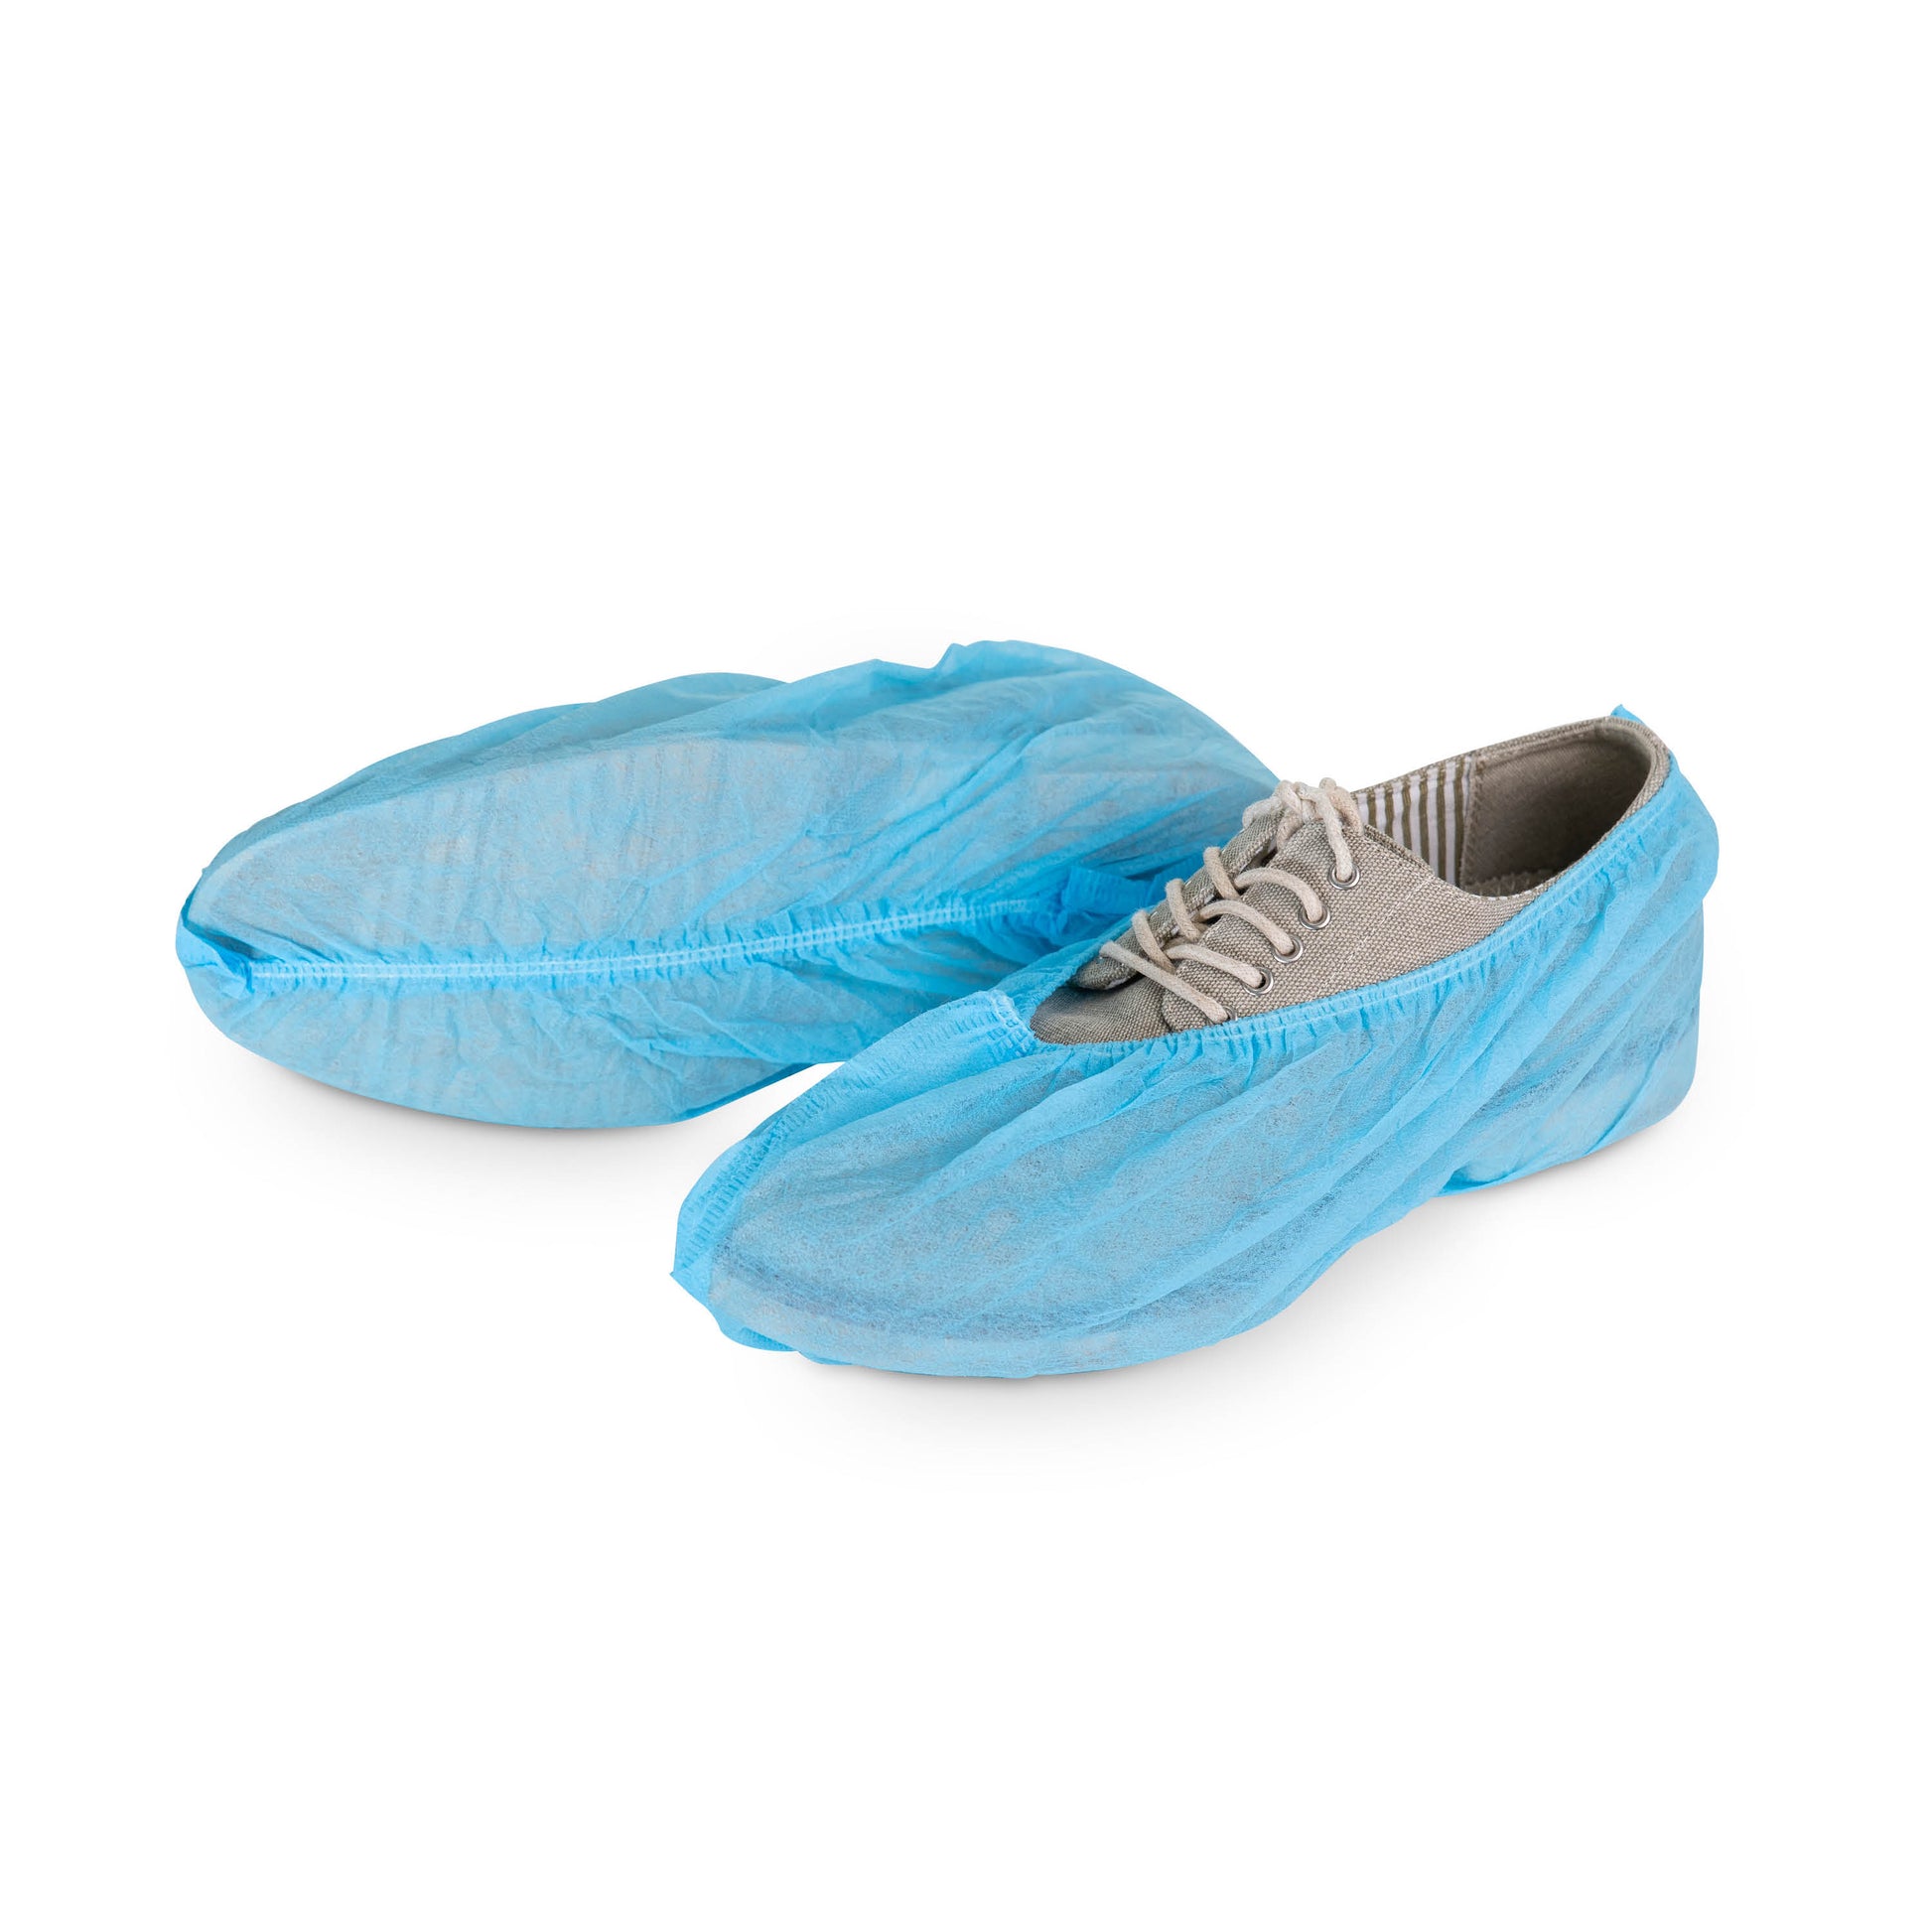 Standard Shoe Covers Case of 1000